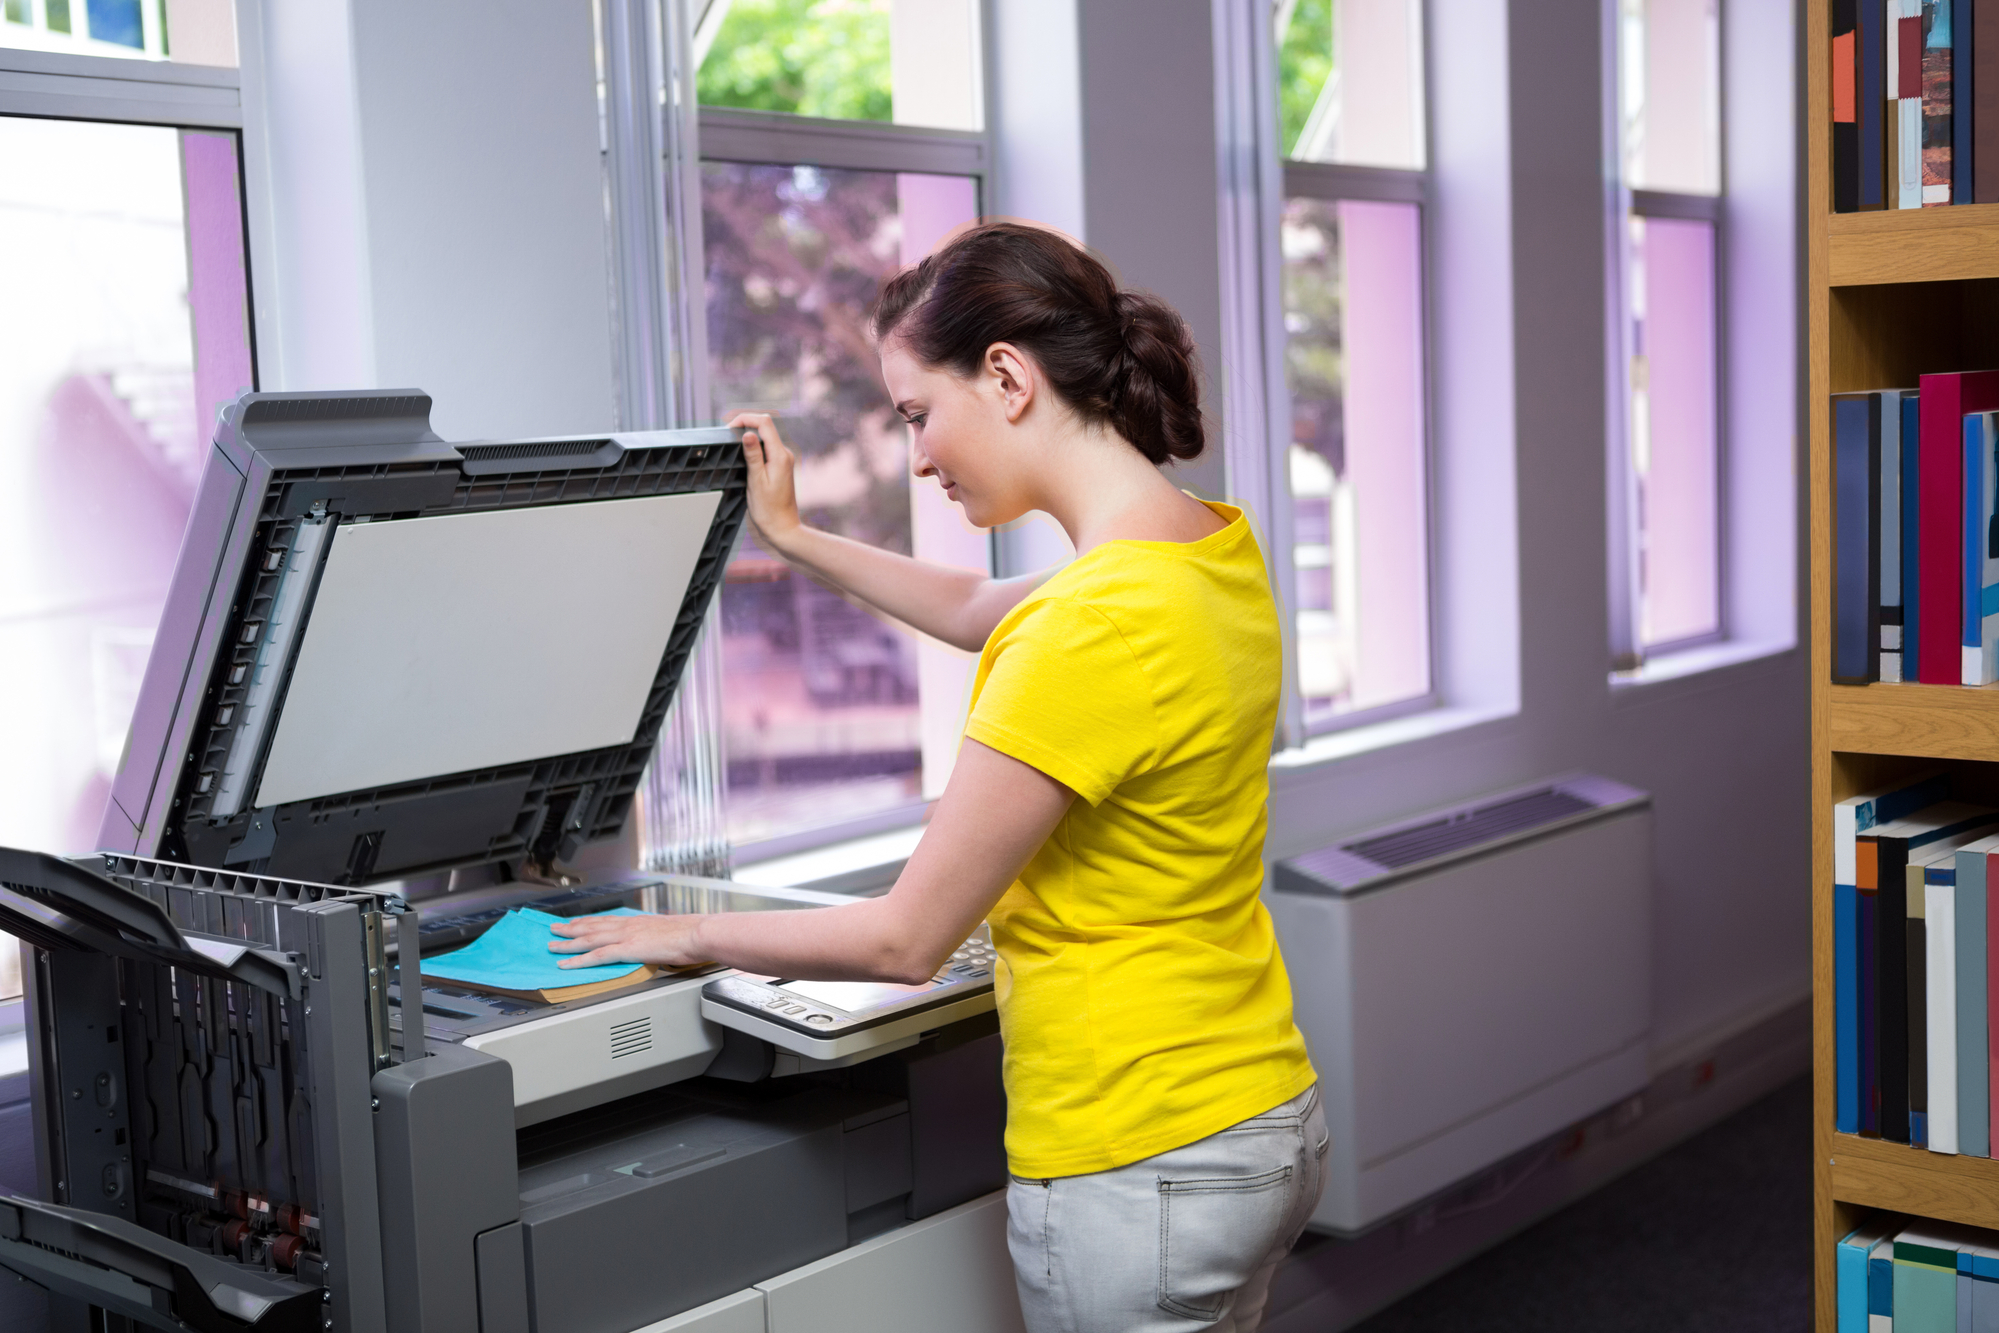 Student photocopying her book in the library at the university